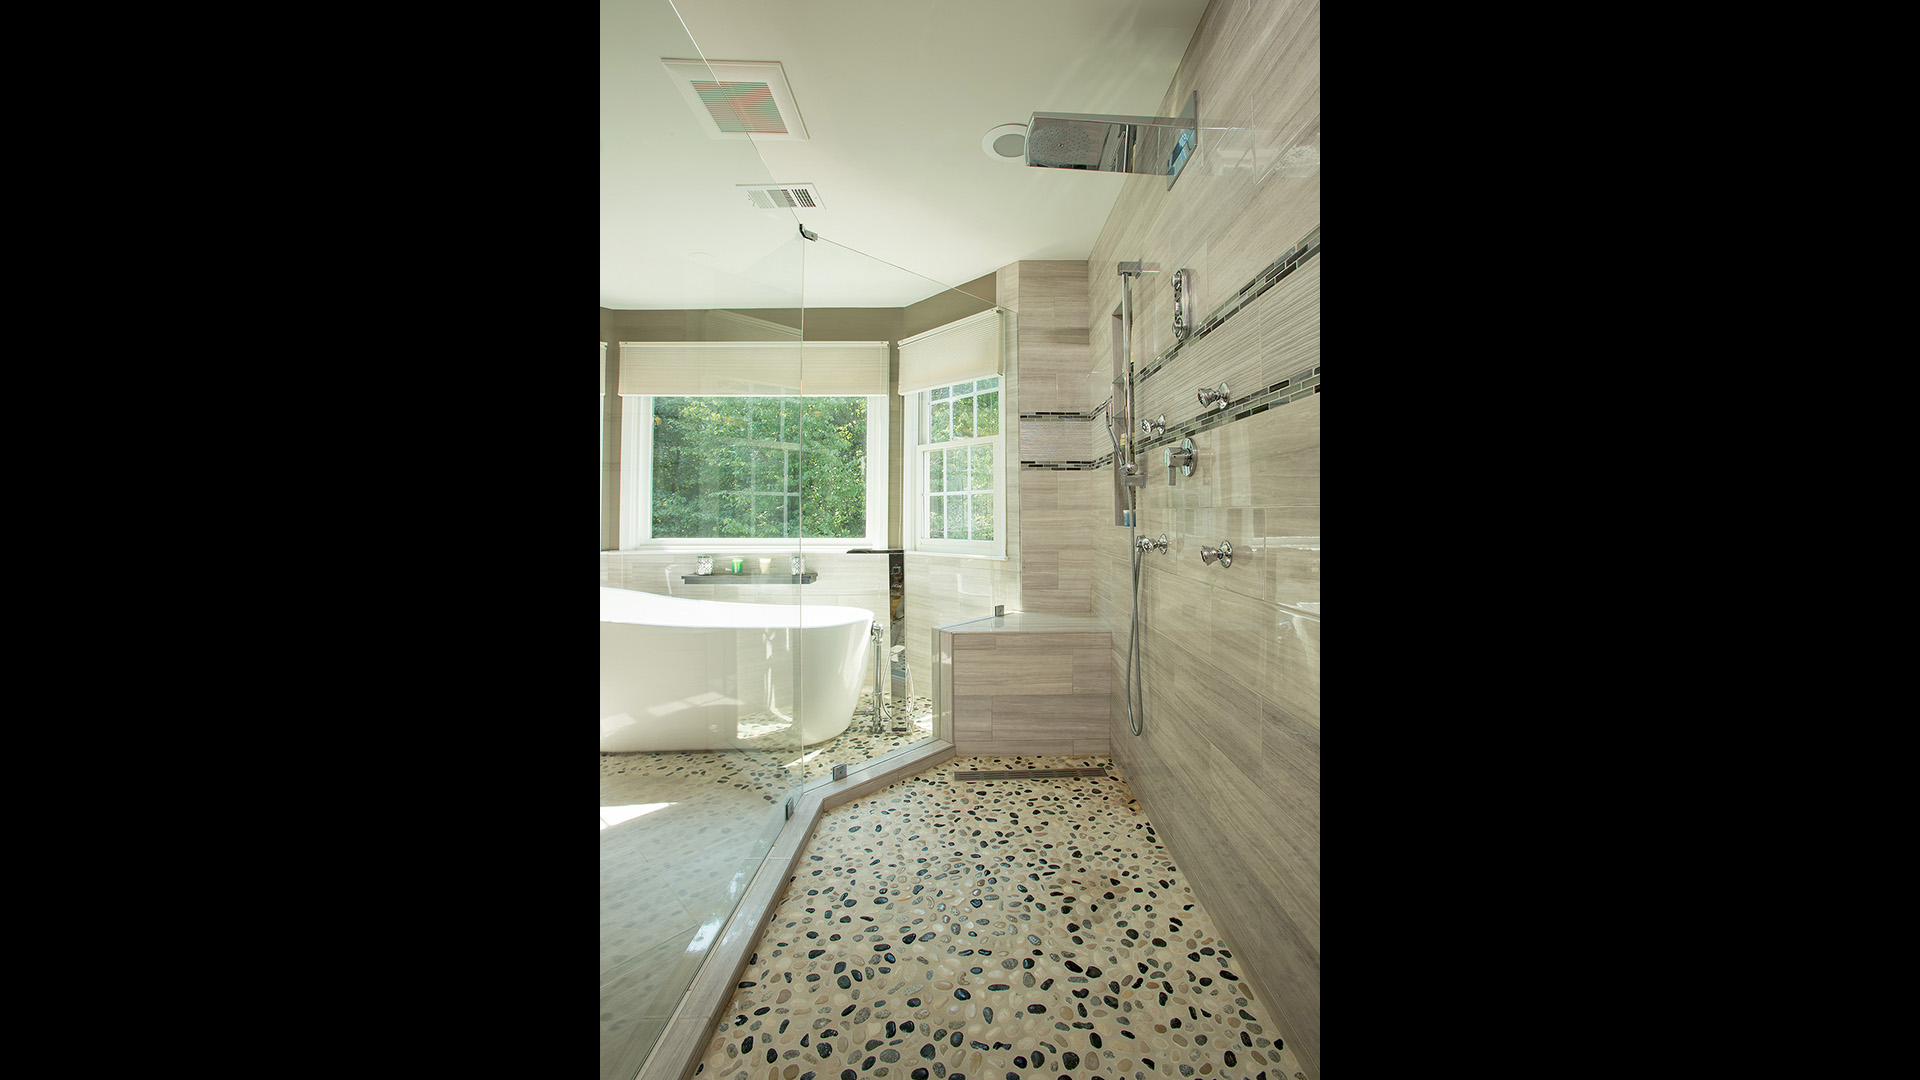 2017 National NARI Contractor of the Year Winner, Residential Bath $25,000 to $50,000